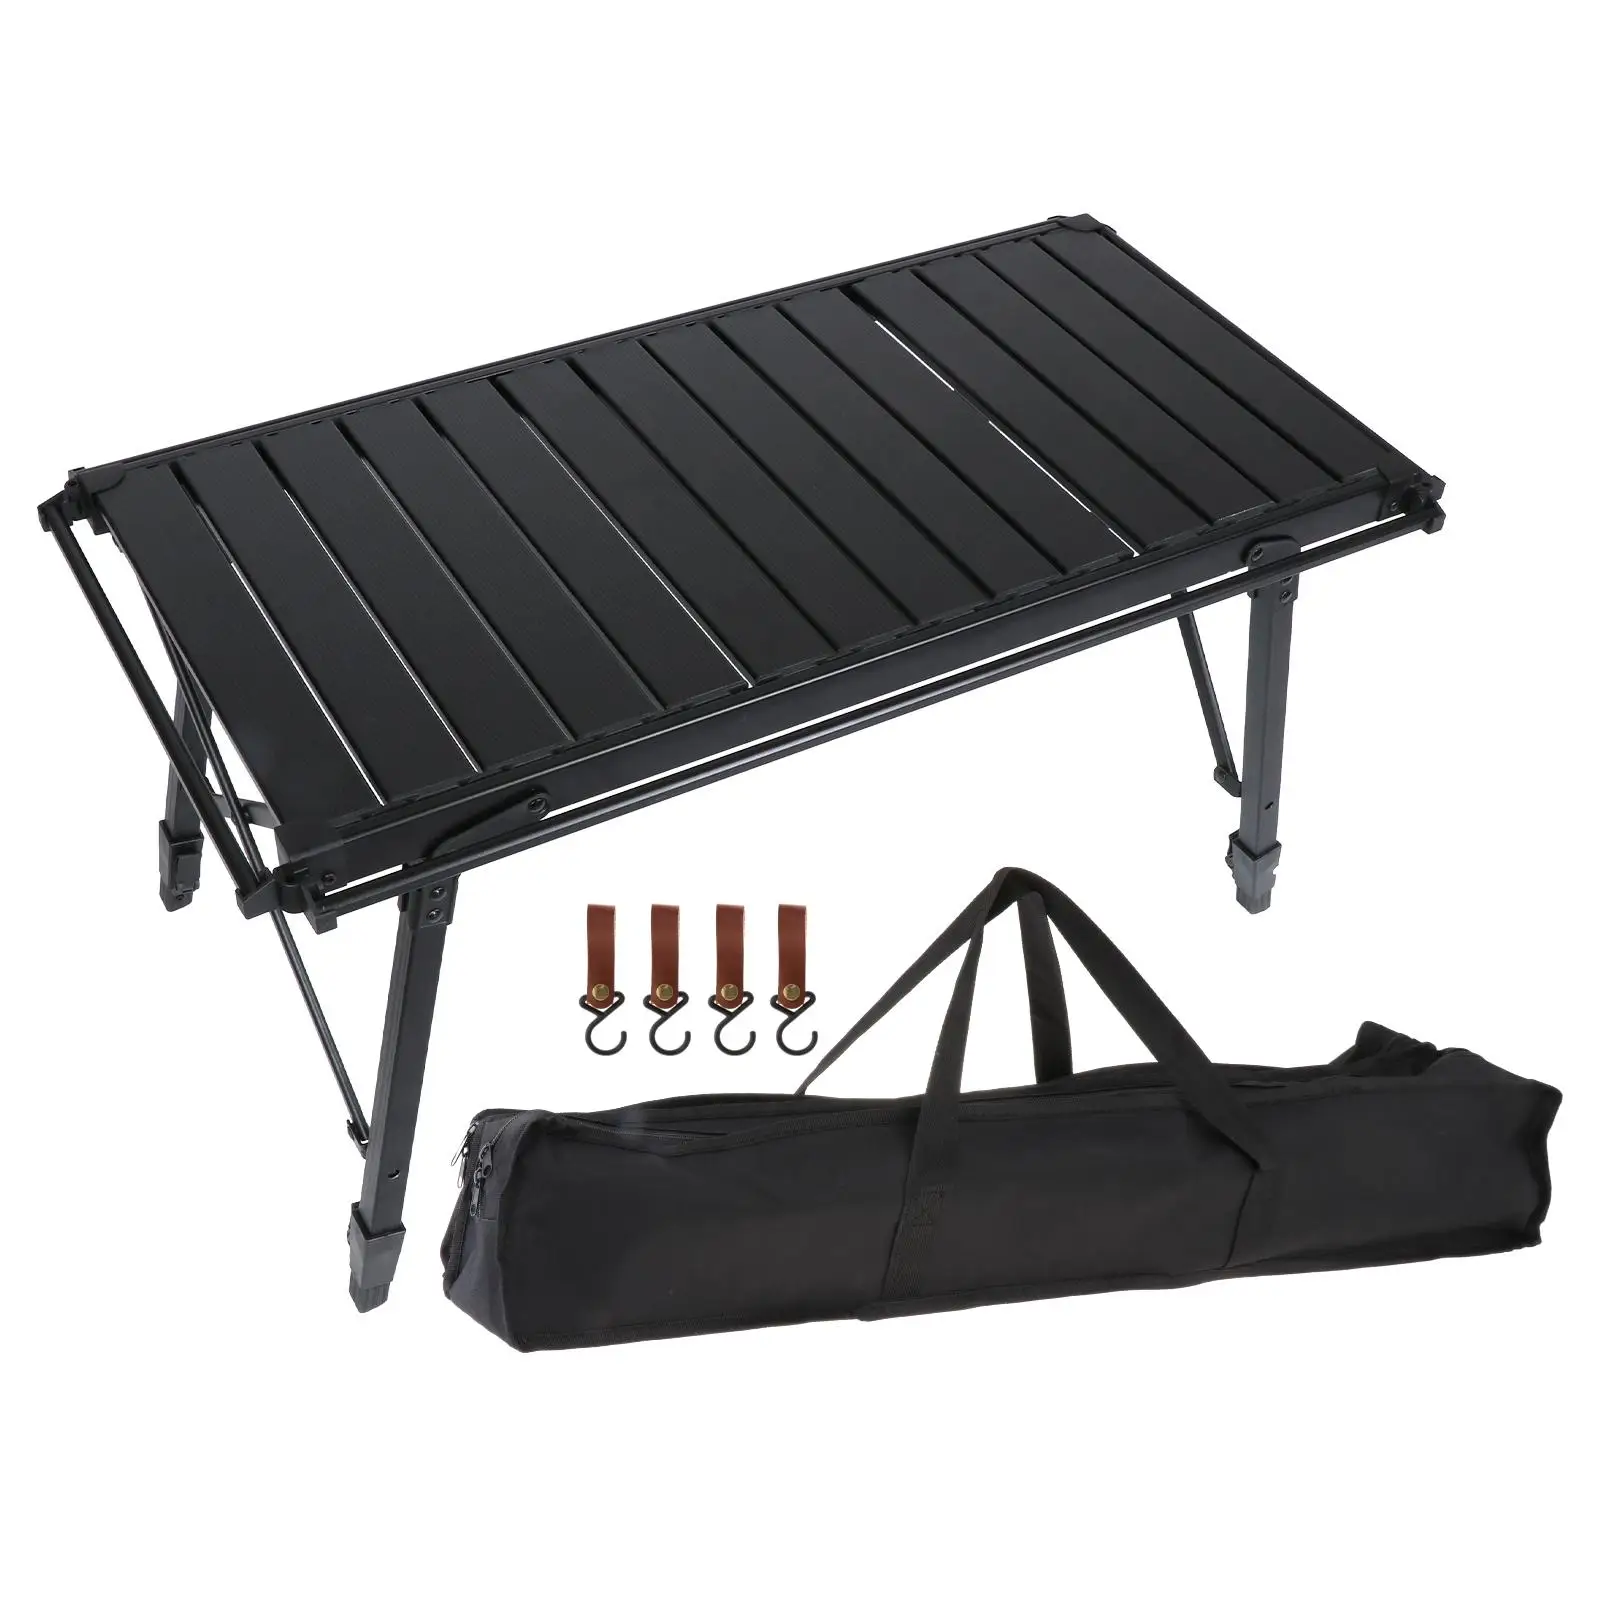 Camping Folding Table Camp Table Adjustable Height Furniture Outdoor Table for Fishing Balcony Outdoor Indoor Barbecue Kitchen